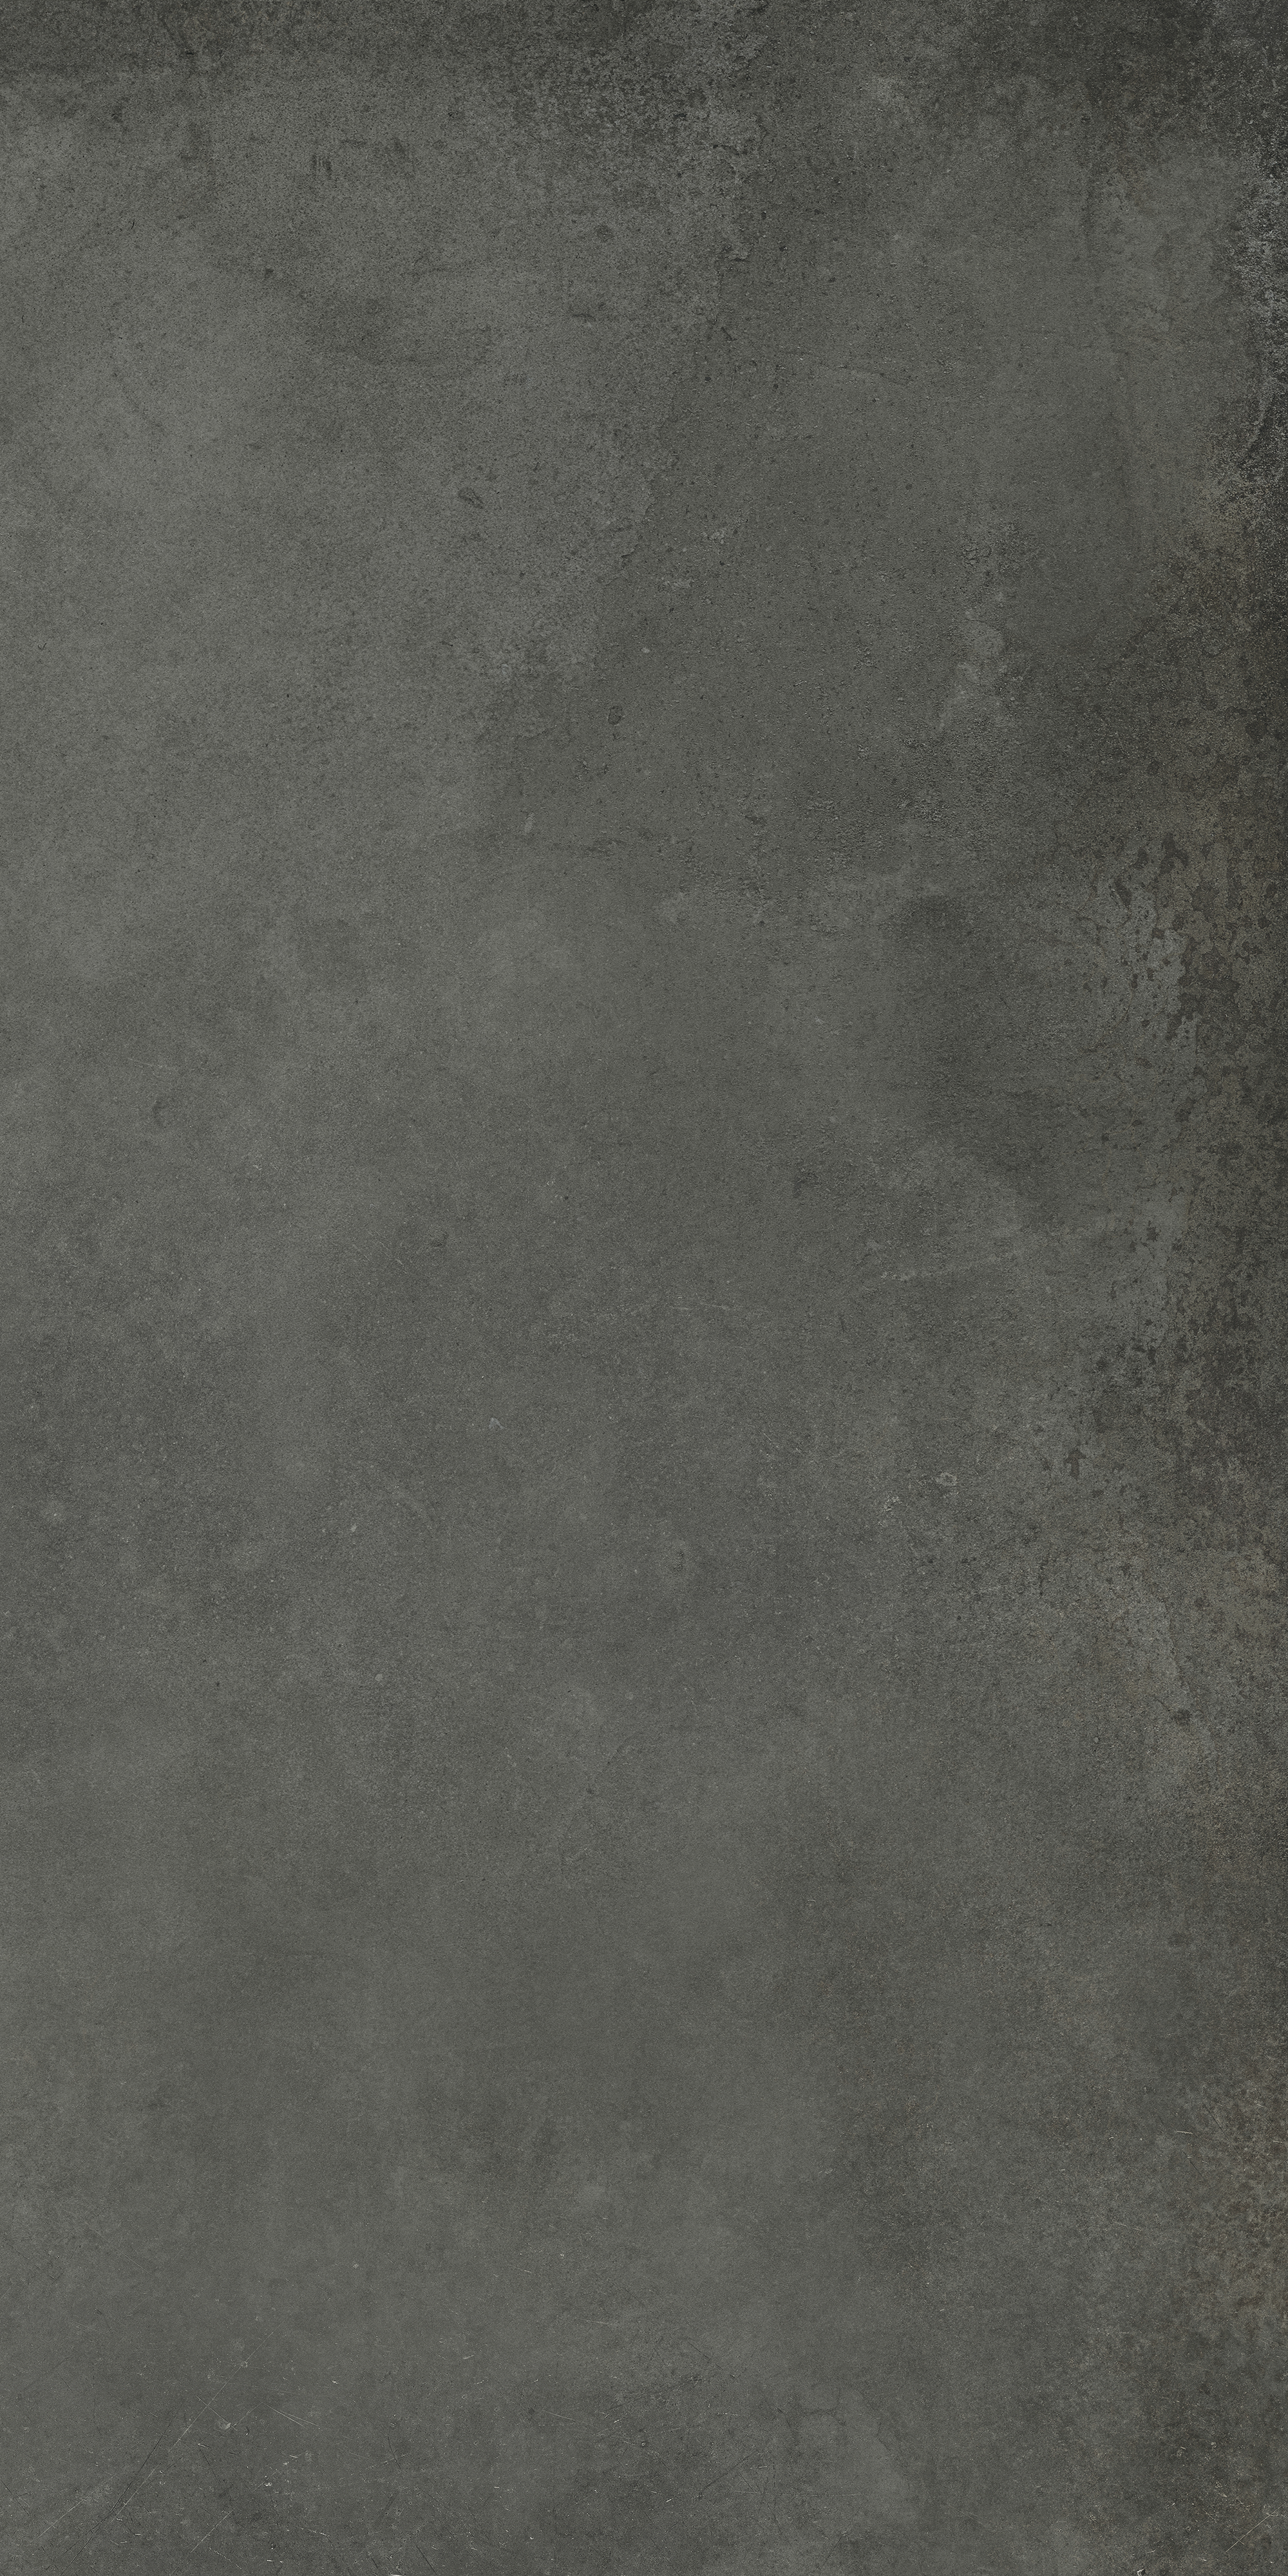 oxide pattern color body porcelain field tile from ceraforge anatolia collection distributed by surface group international matte finish rectified edge 16x32 rectangle shape